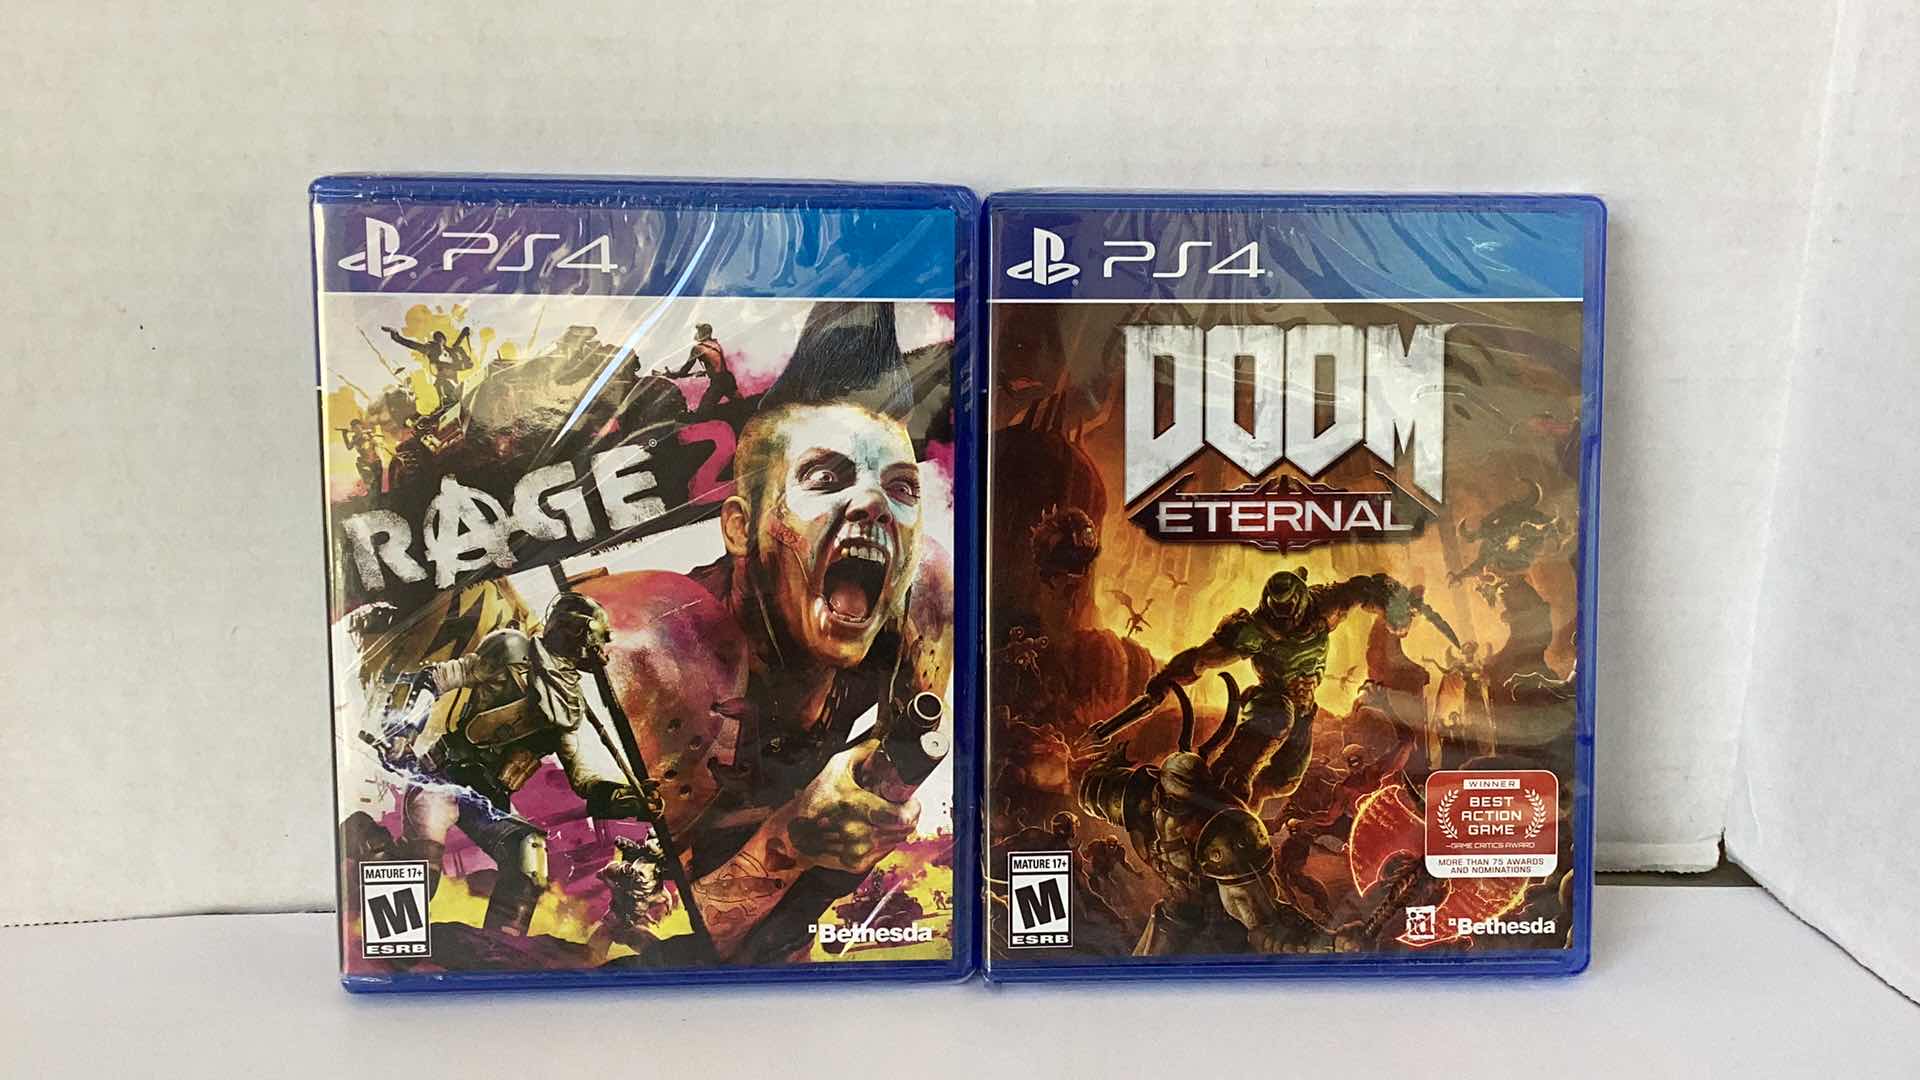 Photo 1 of 2 NEW PS4 GAMES: RAGE 2 AND DOOM ETERNAL